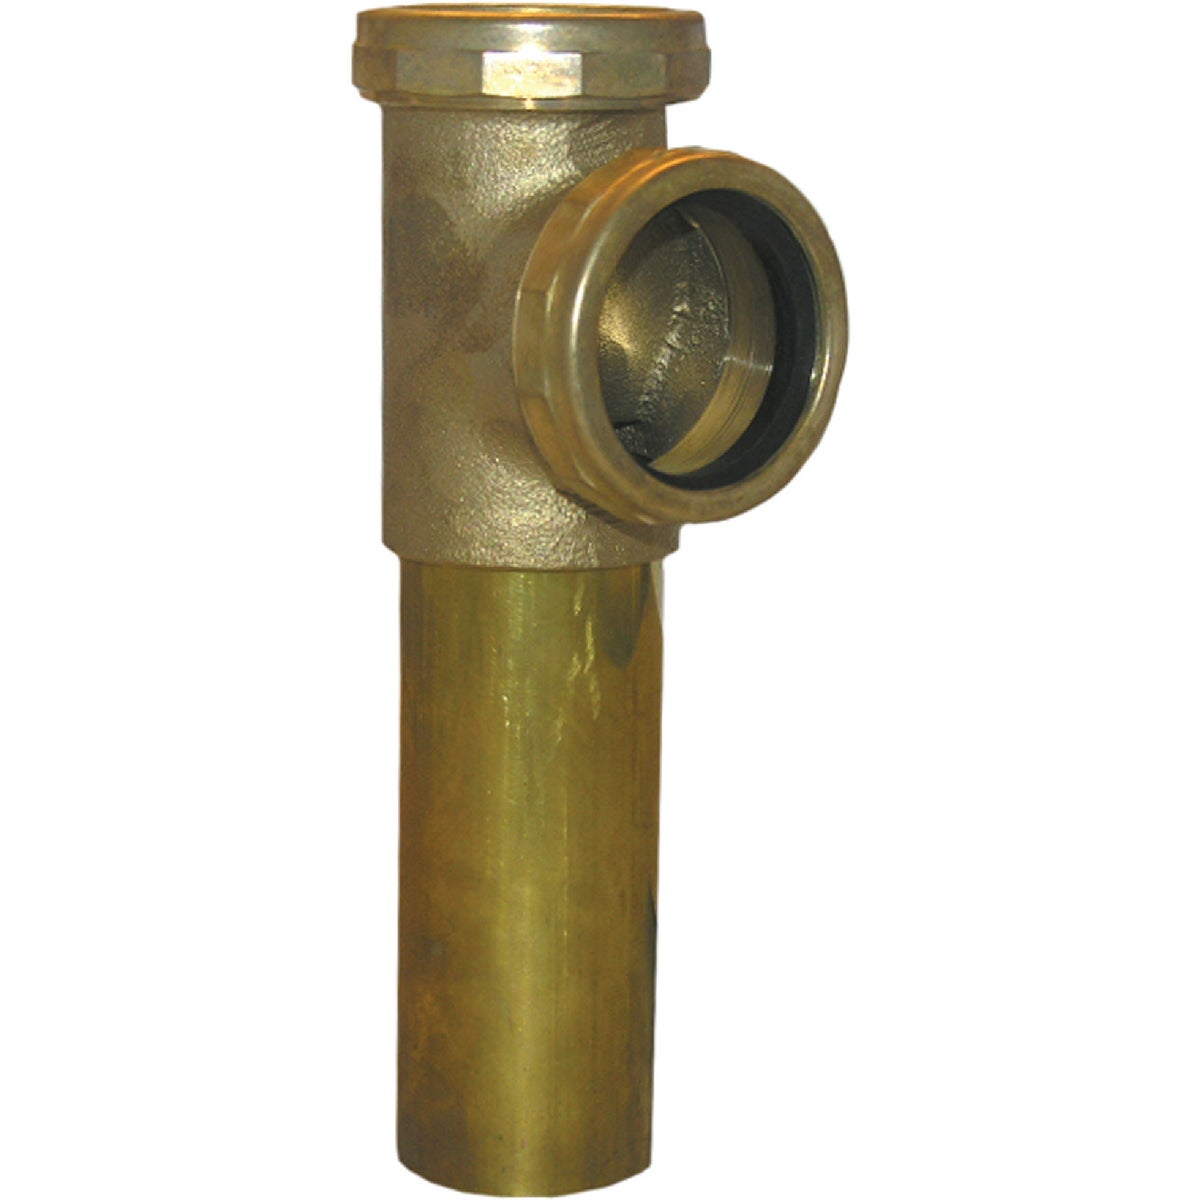 Lasco 1-1/2 In. Rough Brass End Outlet Tee